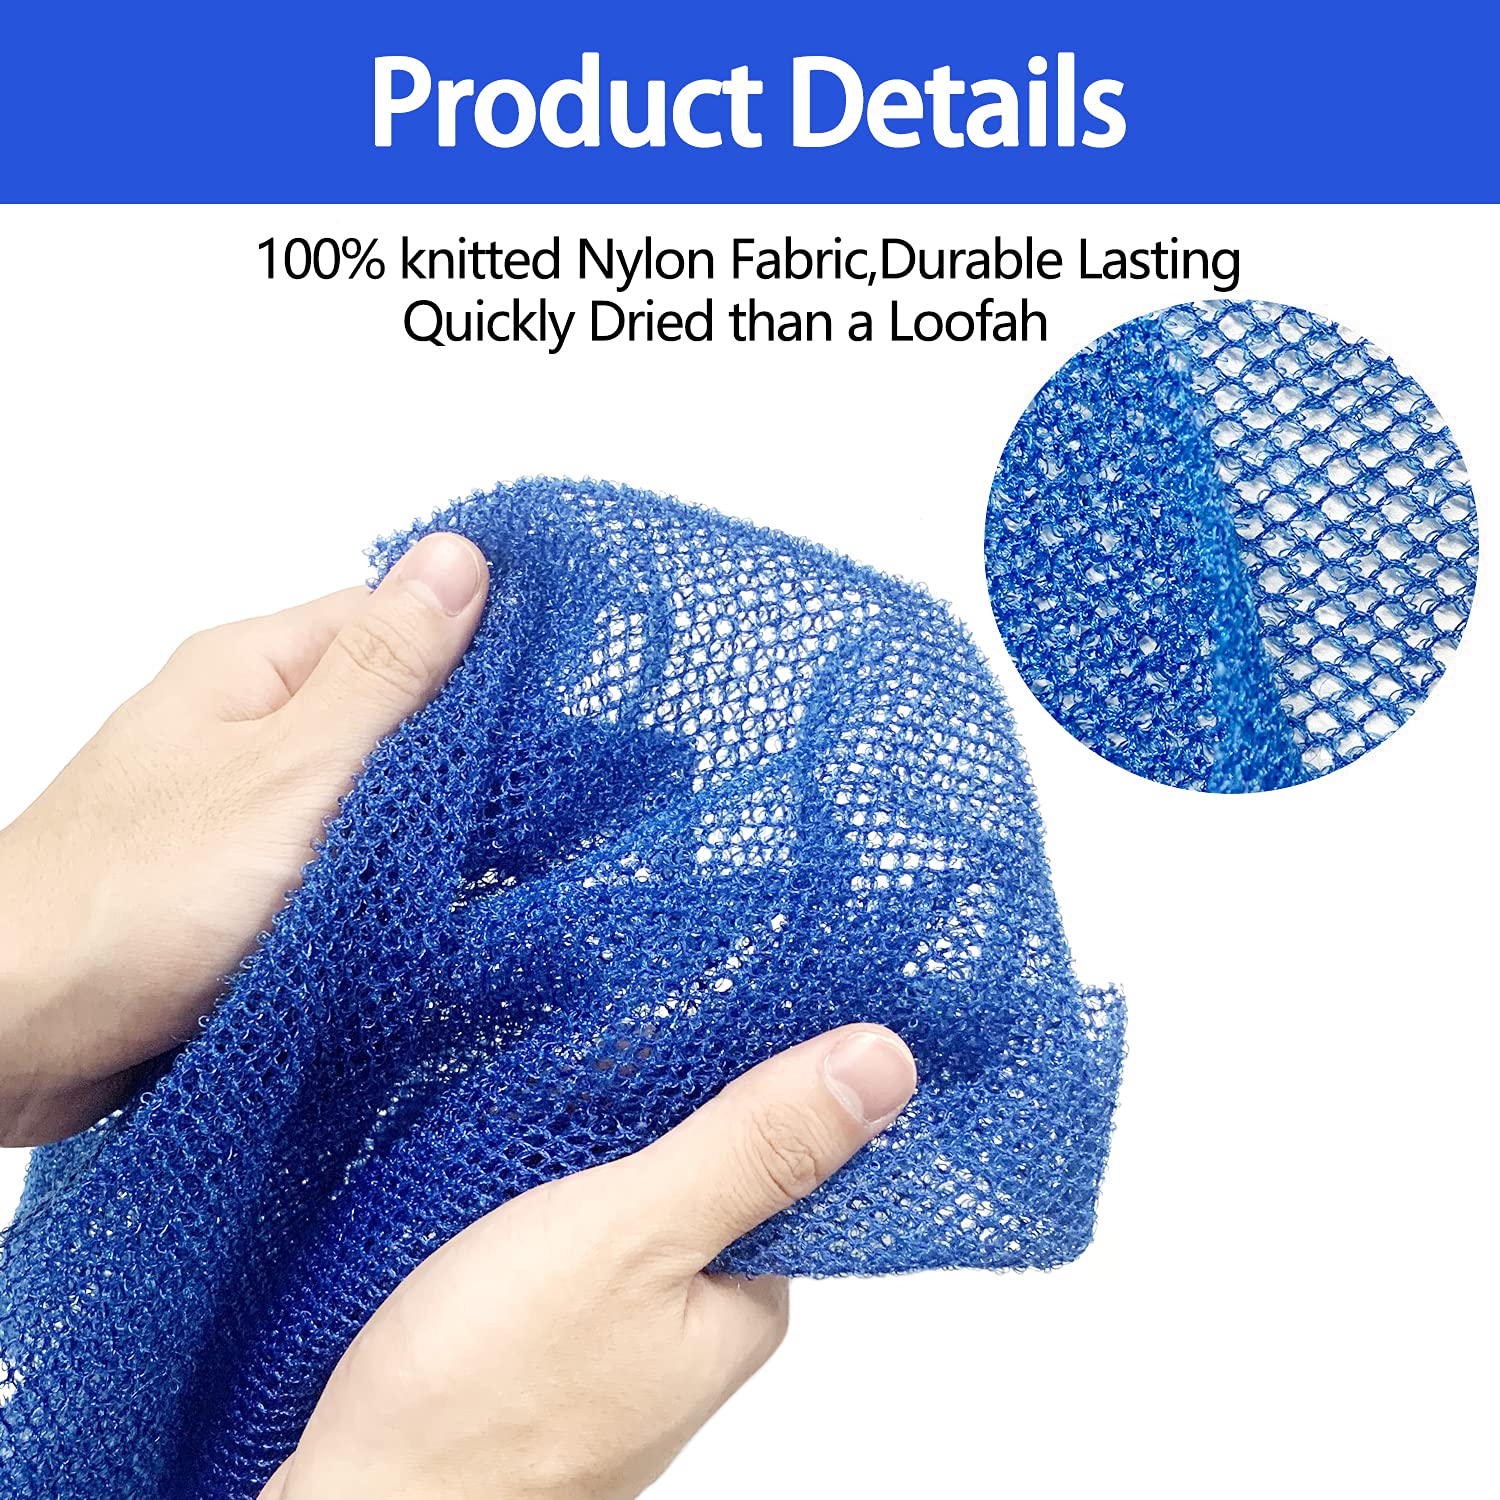 Exfoliating Washcloth Towel Body Scrubber Loofah African Net Bathing Sponge Back Scrubber for Shower Mesh Pouf Sponge Skin Smoother for Daily Use or Stocking Stuffer Bathroom Accessories 2pcs